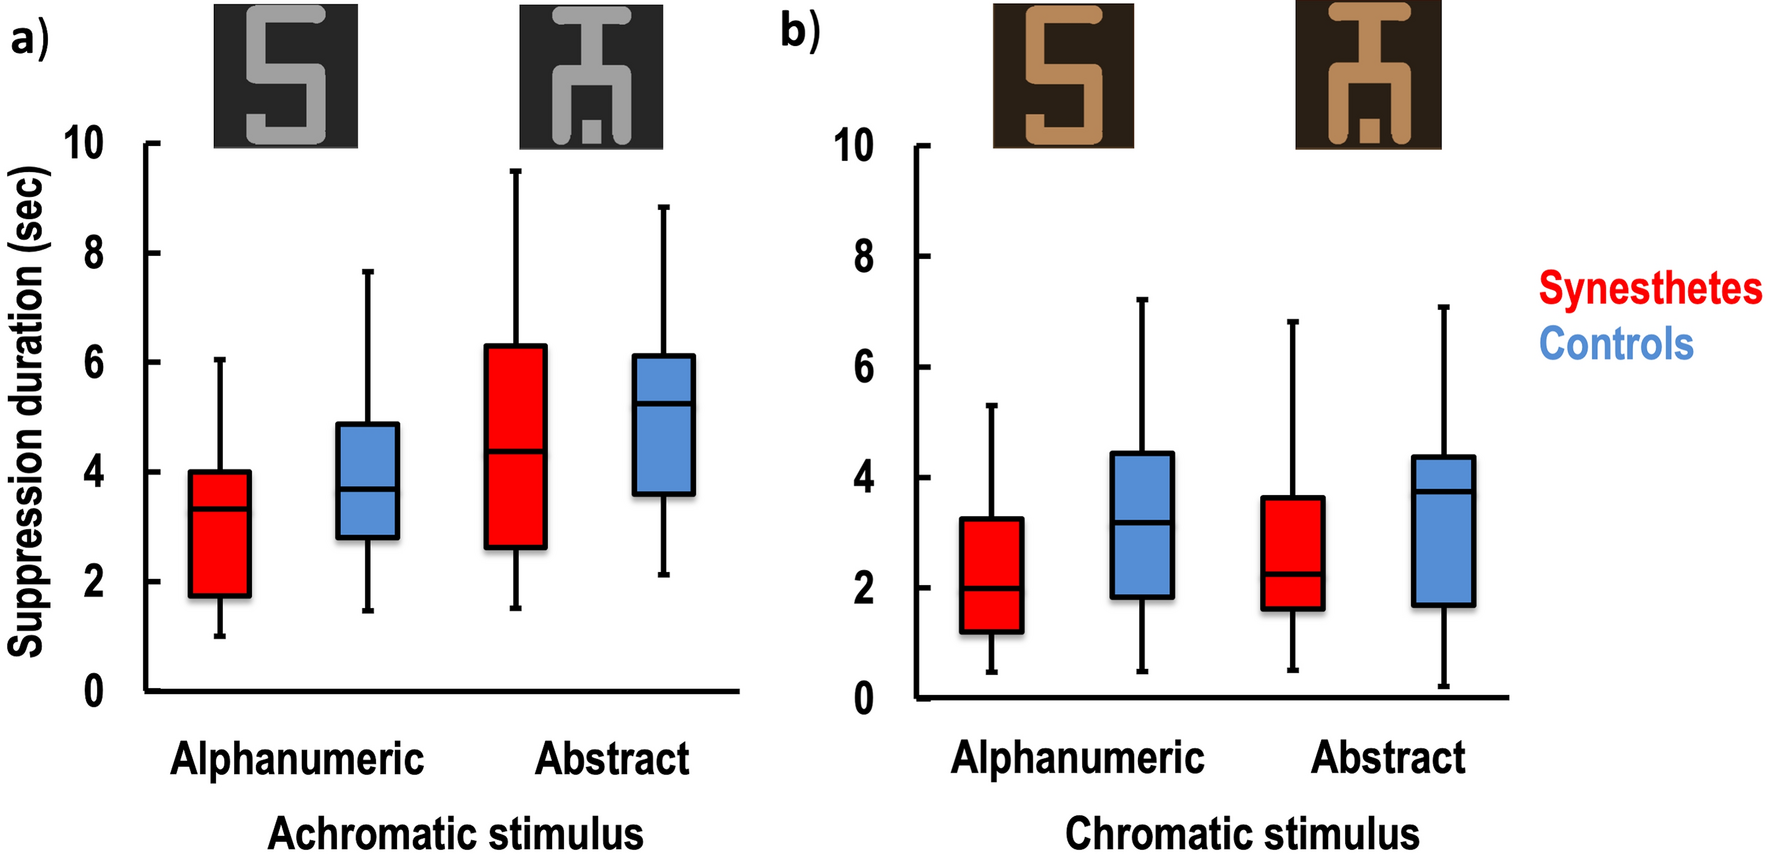 Synesthesia does not help to recover perceptual dominance following flash  suppression | Scientific Reports